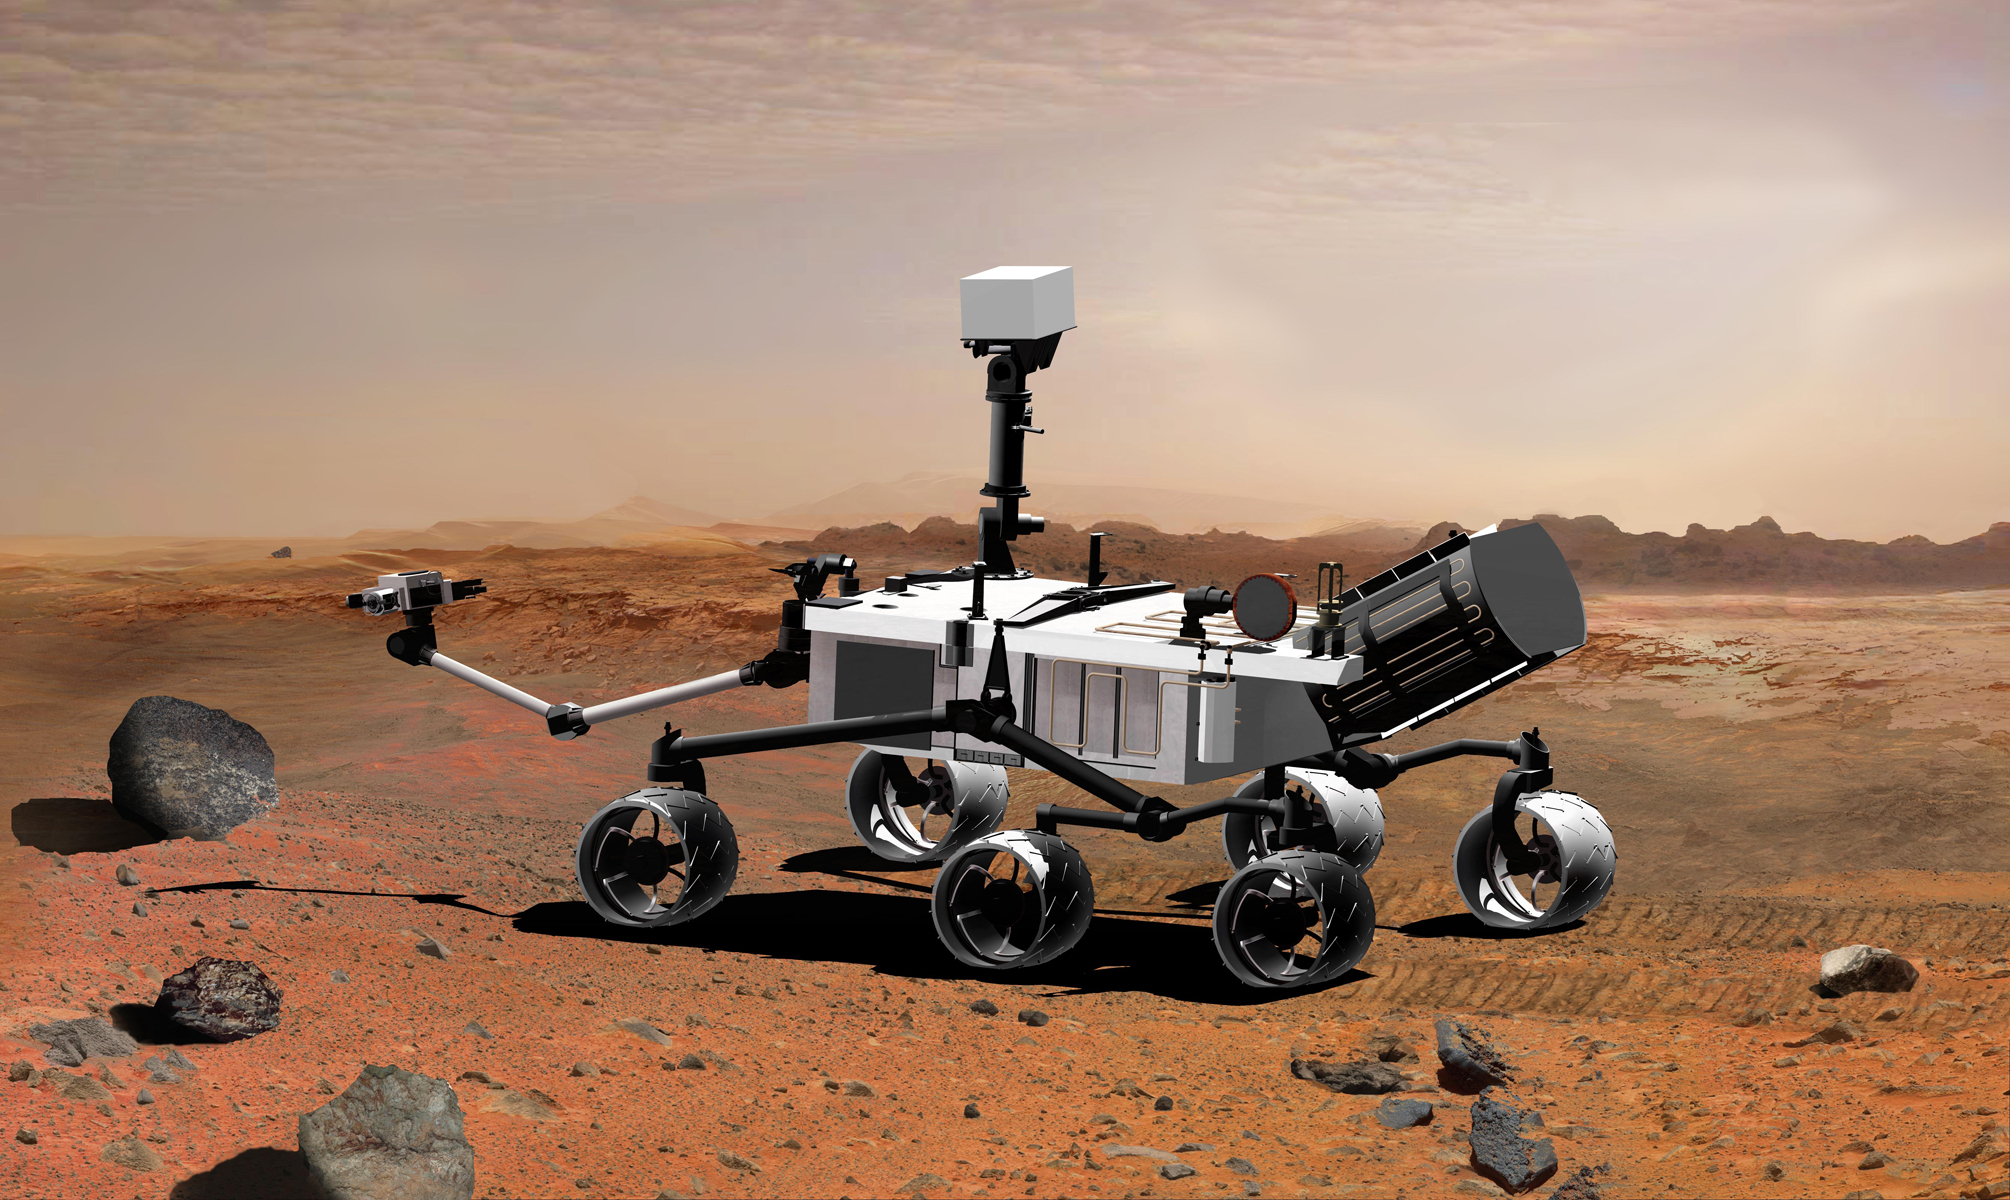 NASA's Mars Science Laboratory, a mobile robot for investigating Mars' past or present ability to sustain microbial life, is in development for a launch opportunity in 2009.